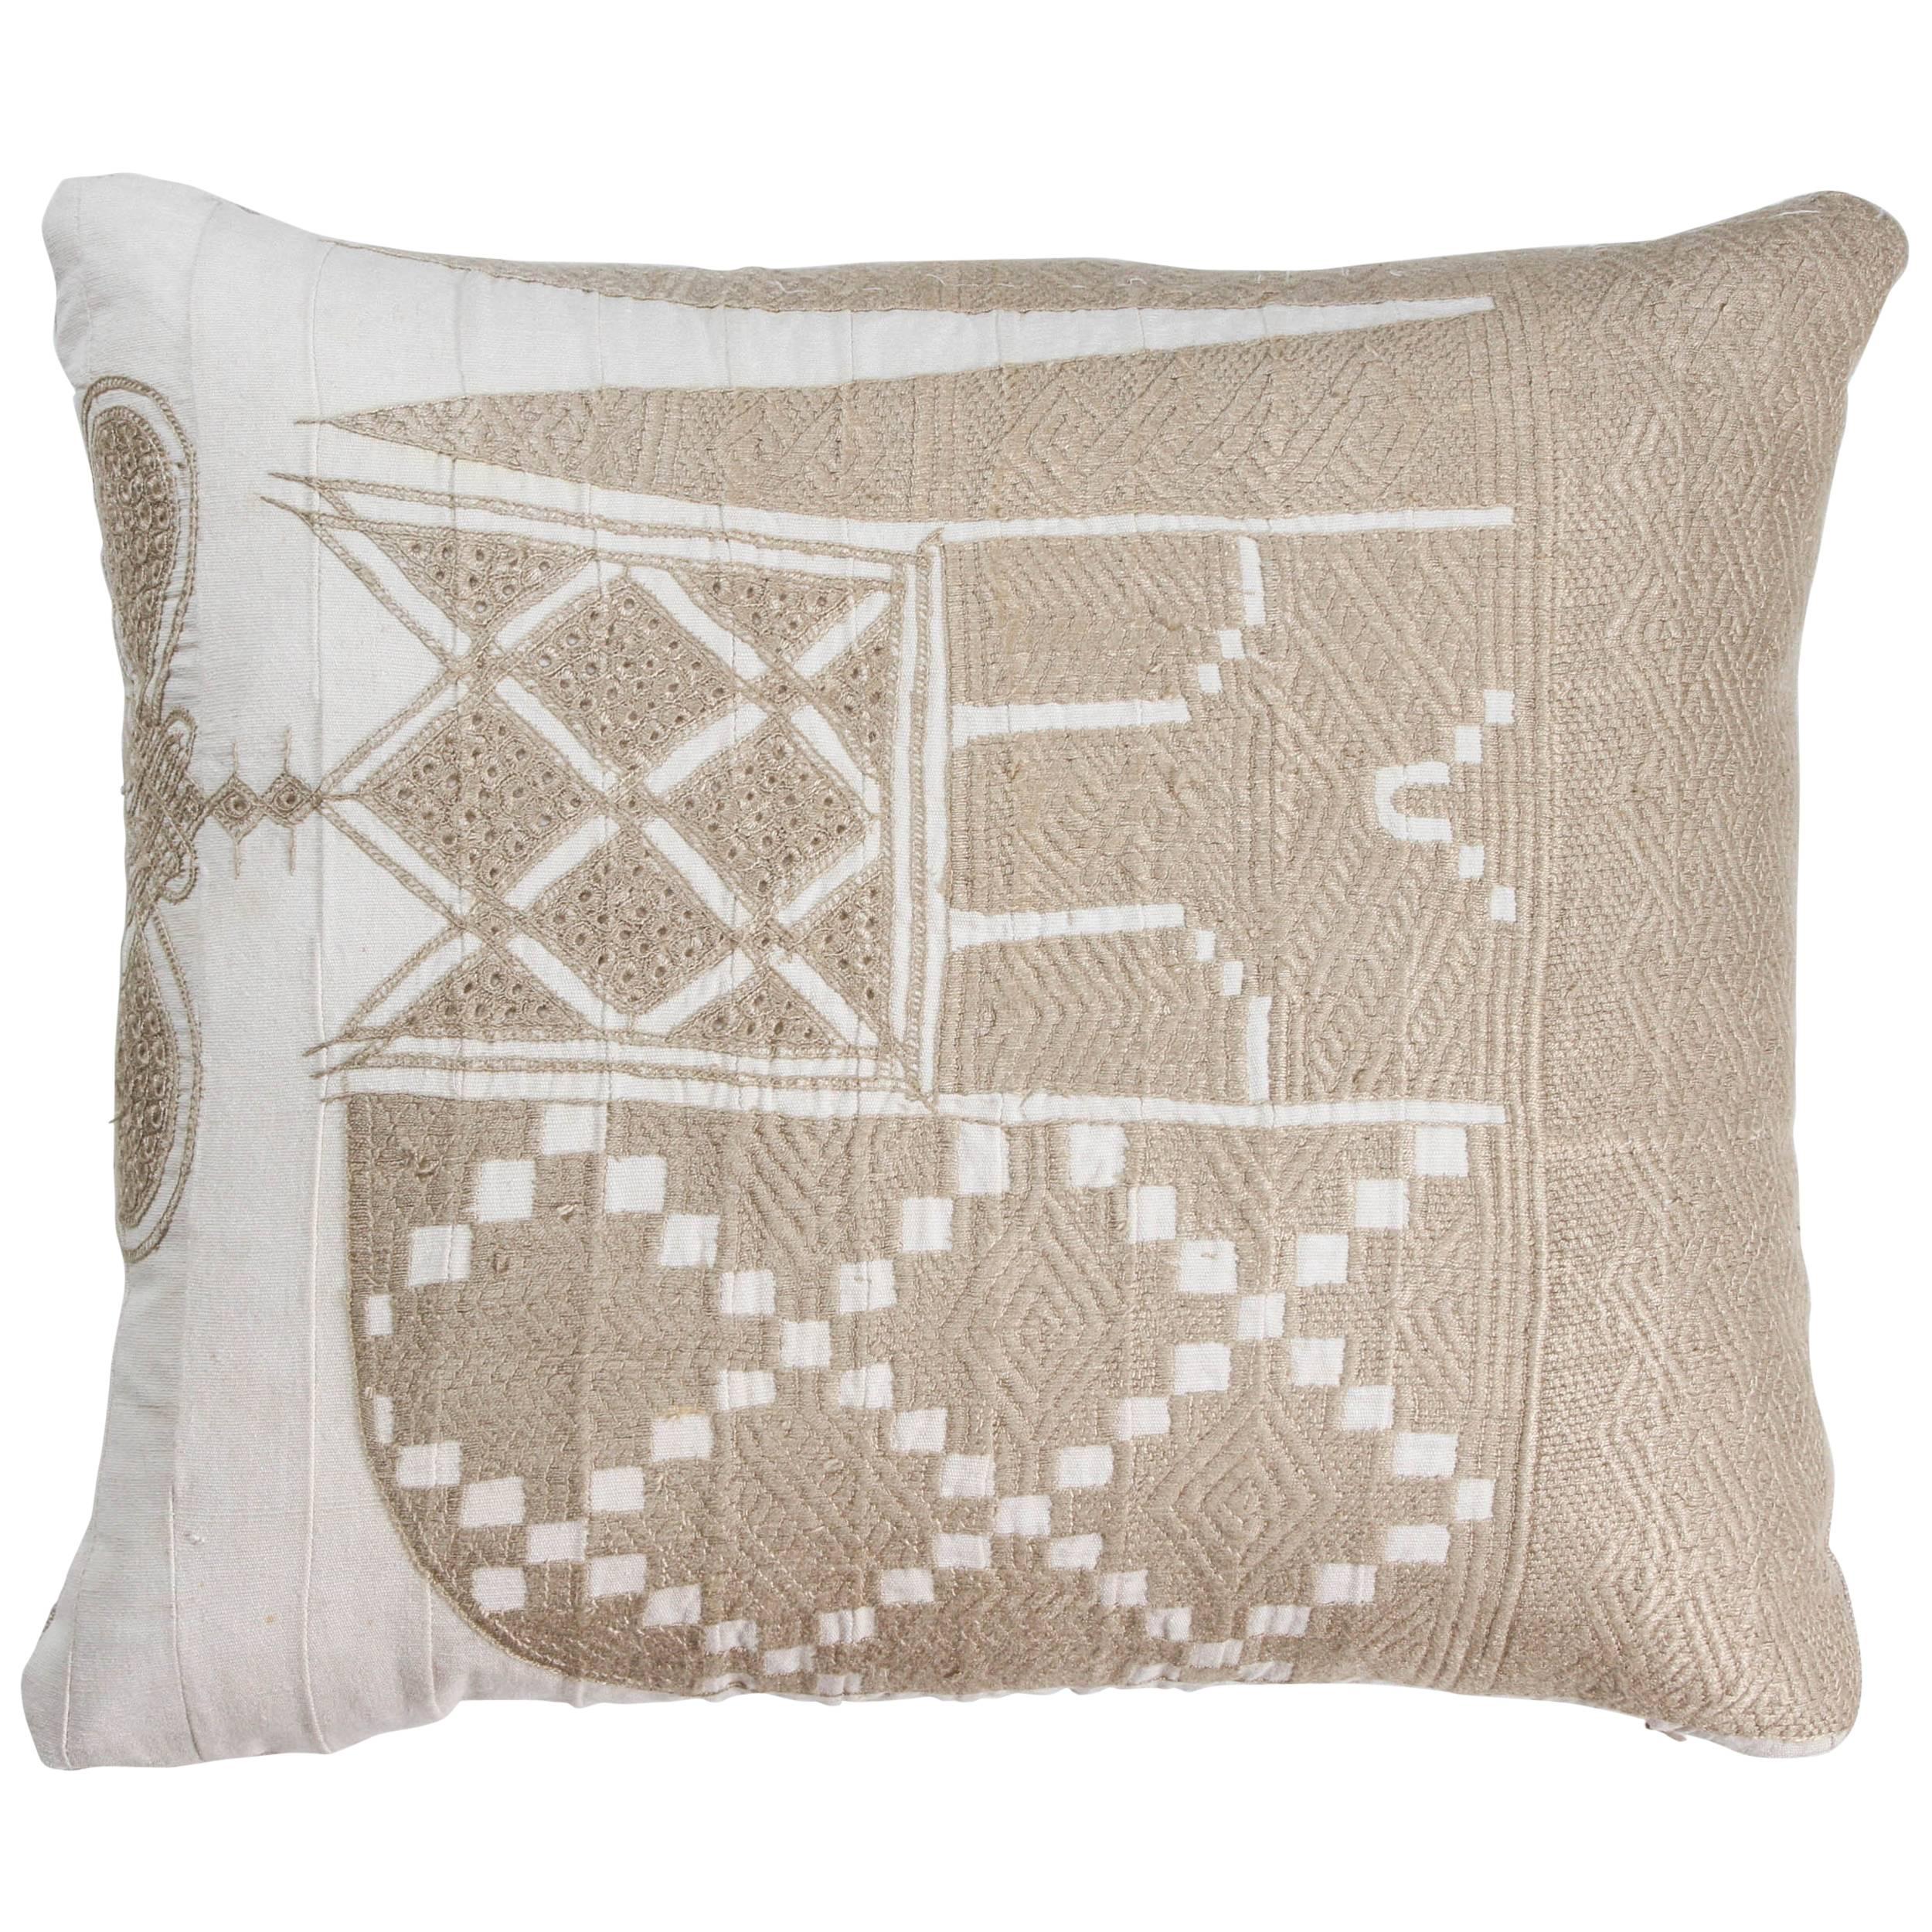 African Embroidery Pillow in Ivory and Beige